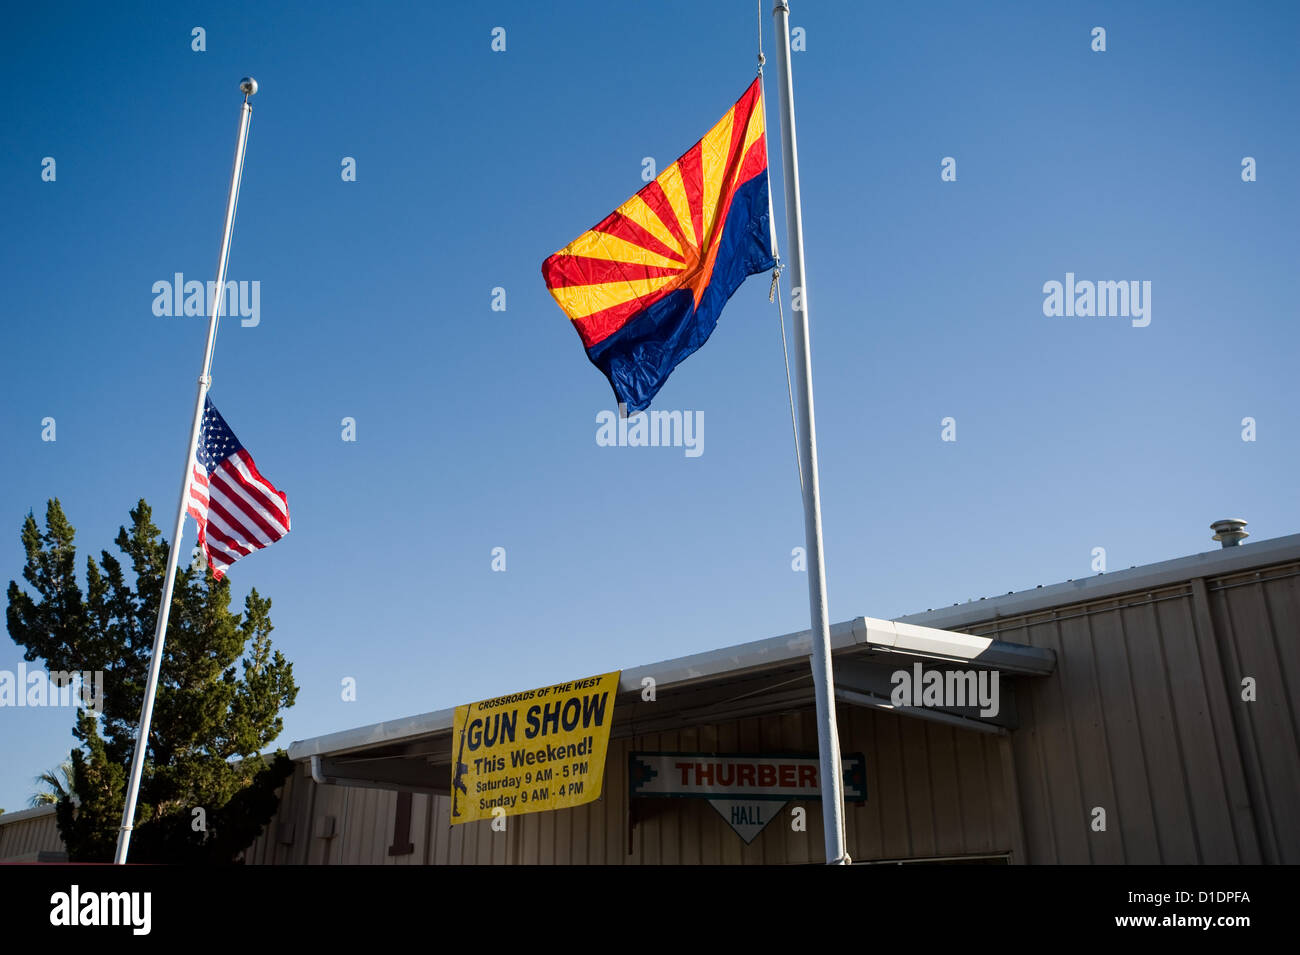 Jan. 14, 2011 - Tucson, Arizona, U.S - As flags fly at half staff as a result of the Jan. 8, 2011 shooting that killed six and wounded 13 including Rep. G.e Giffords, a long-standing gun show is scheduled to open on Jan. 15, 2011 at the Pima County Fairgrounds in Tucson, Ariz. (Credit Image: © Will Seberger/ZUMAPRESS.com) Stock Photo